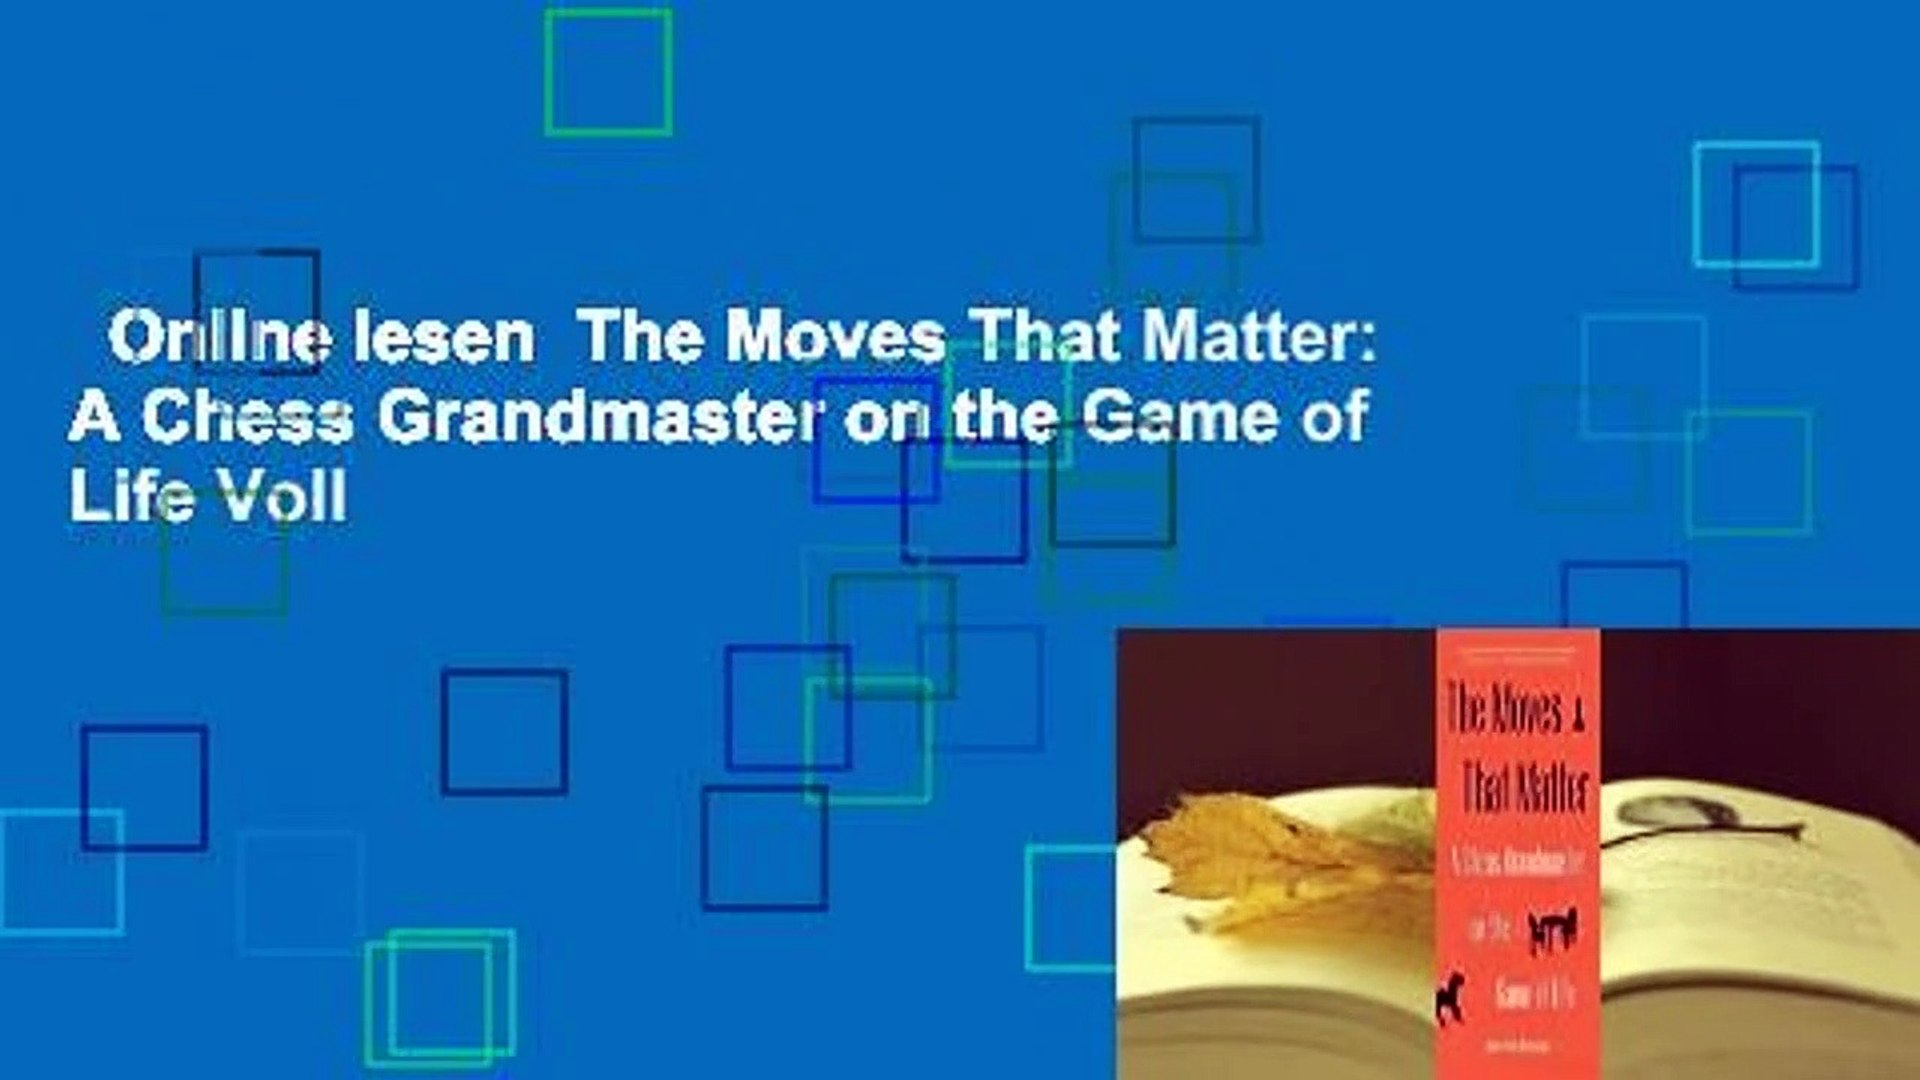 A Chess Grandmaster on the Game of Life The Moves That Matter